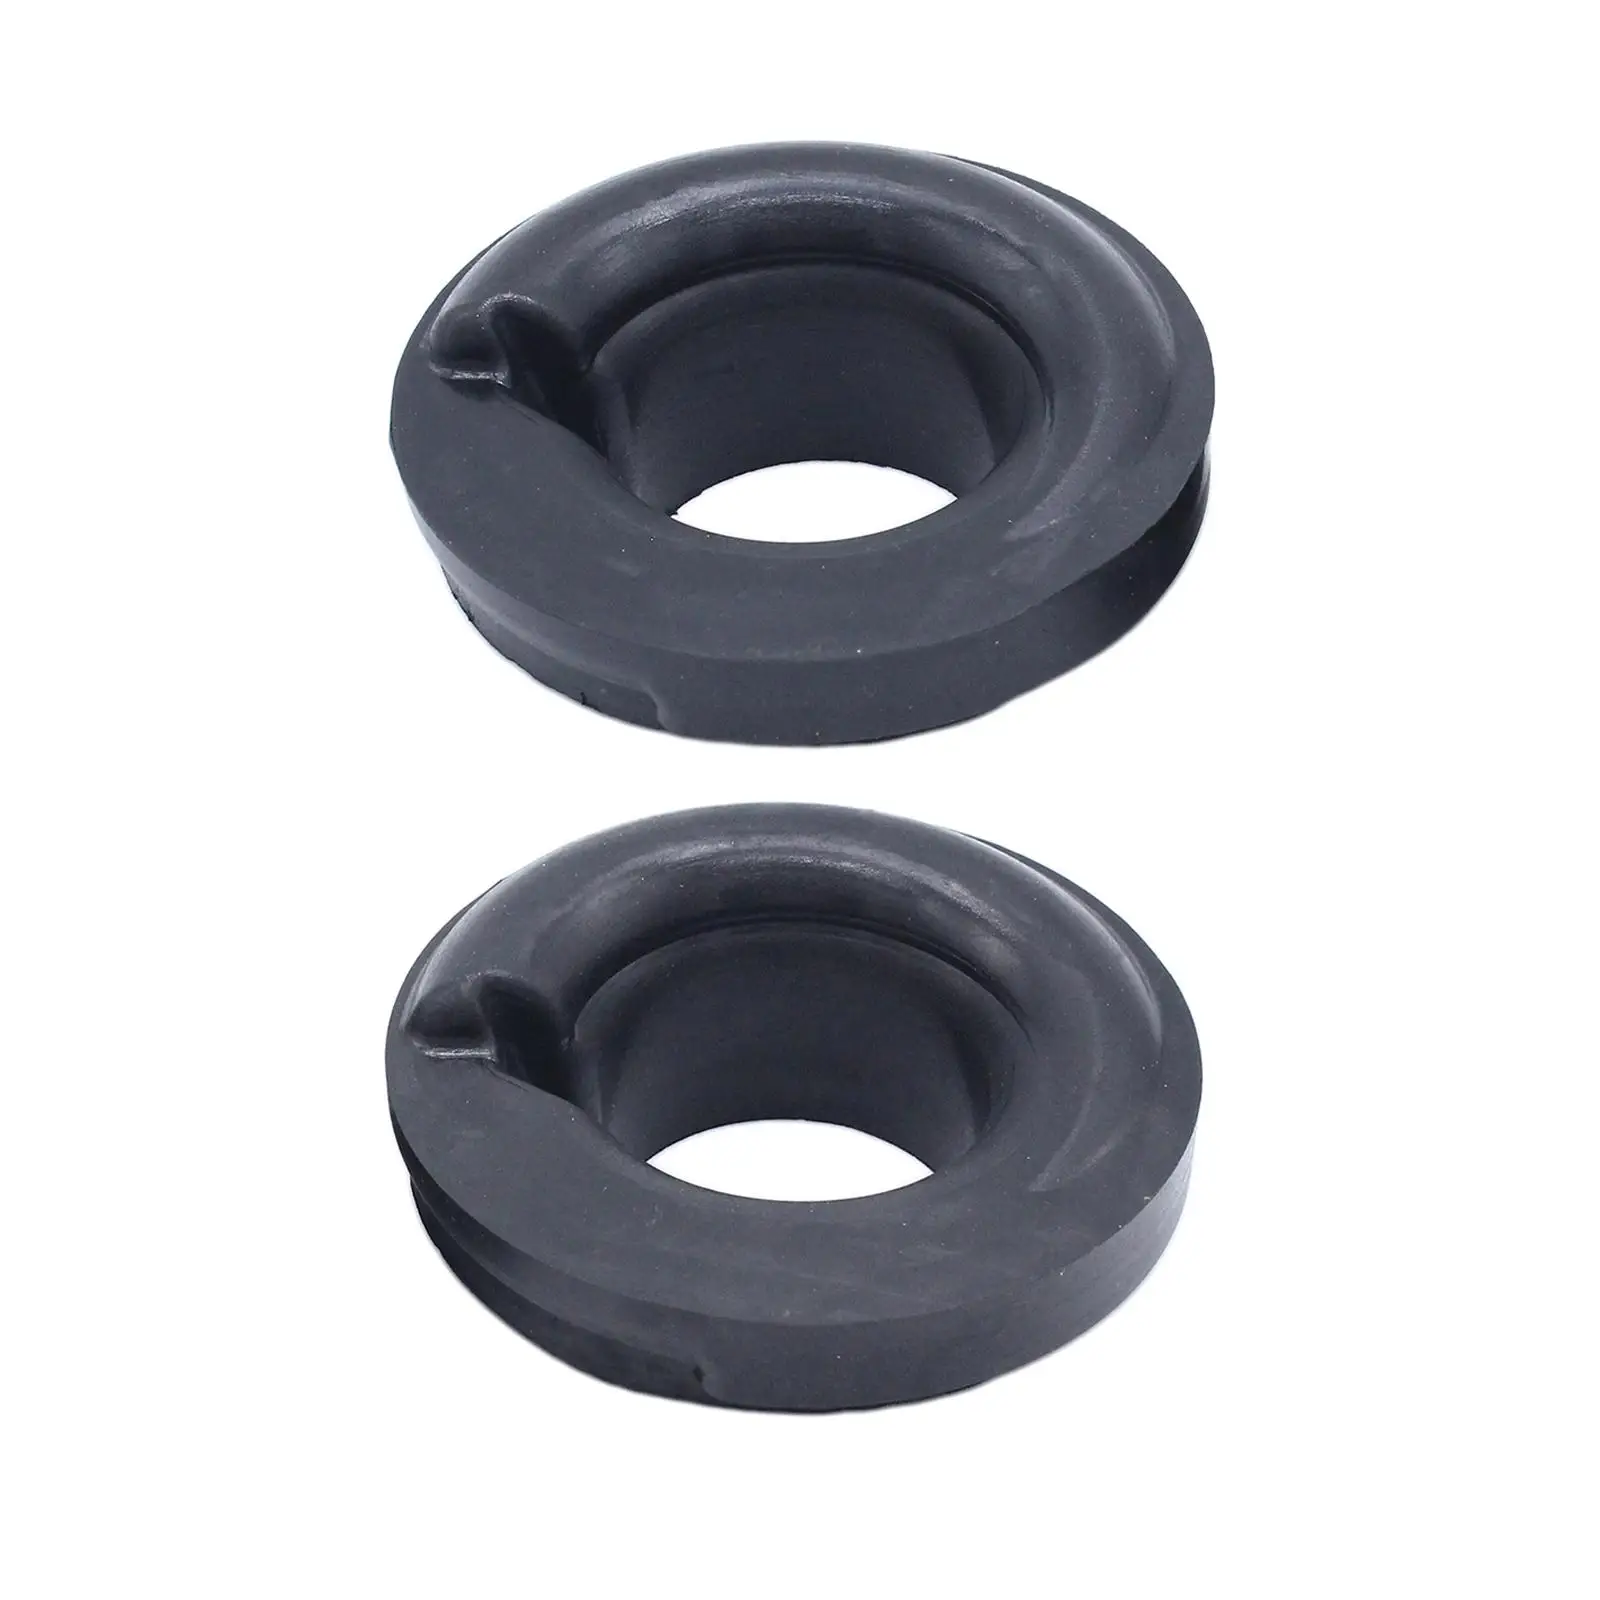 2x Car Rear Lower Spring Rubber Cup Mount for VW T5   2003-2015 Black